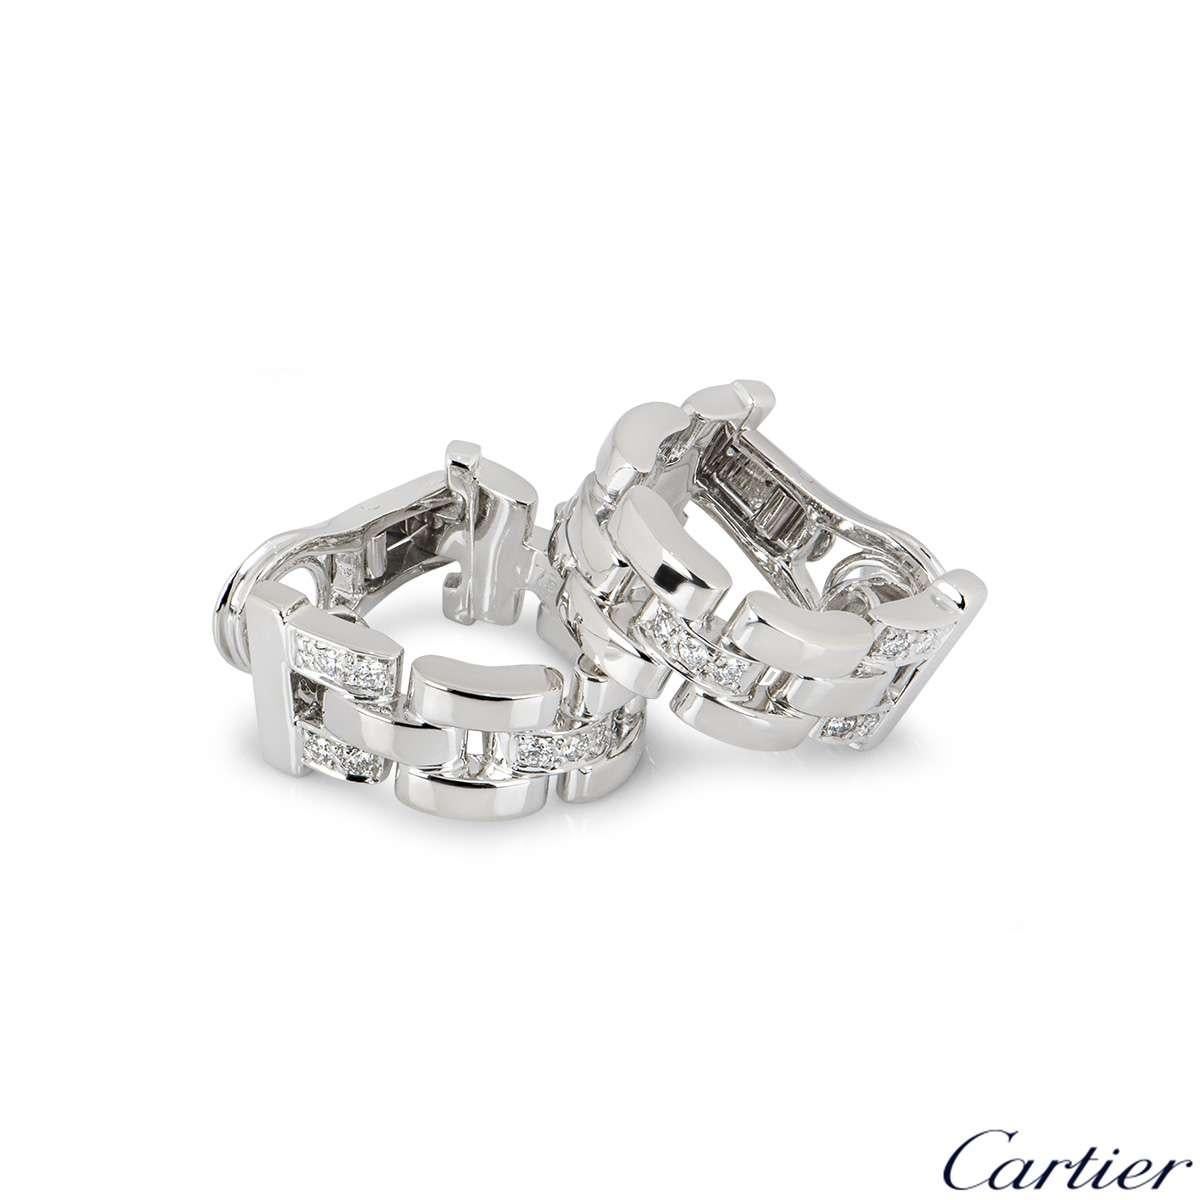 cartier maillon panthere earrings